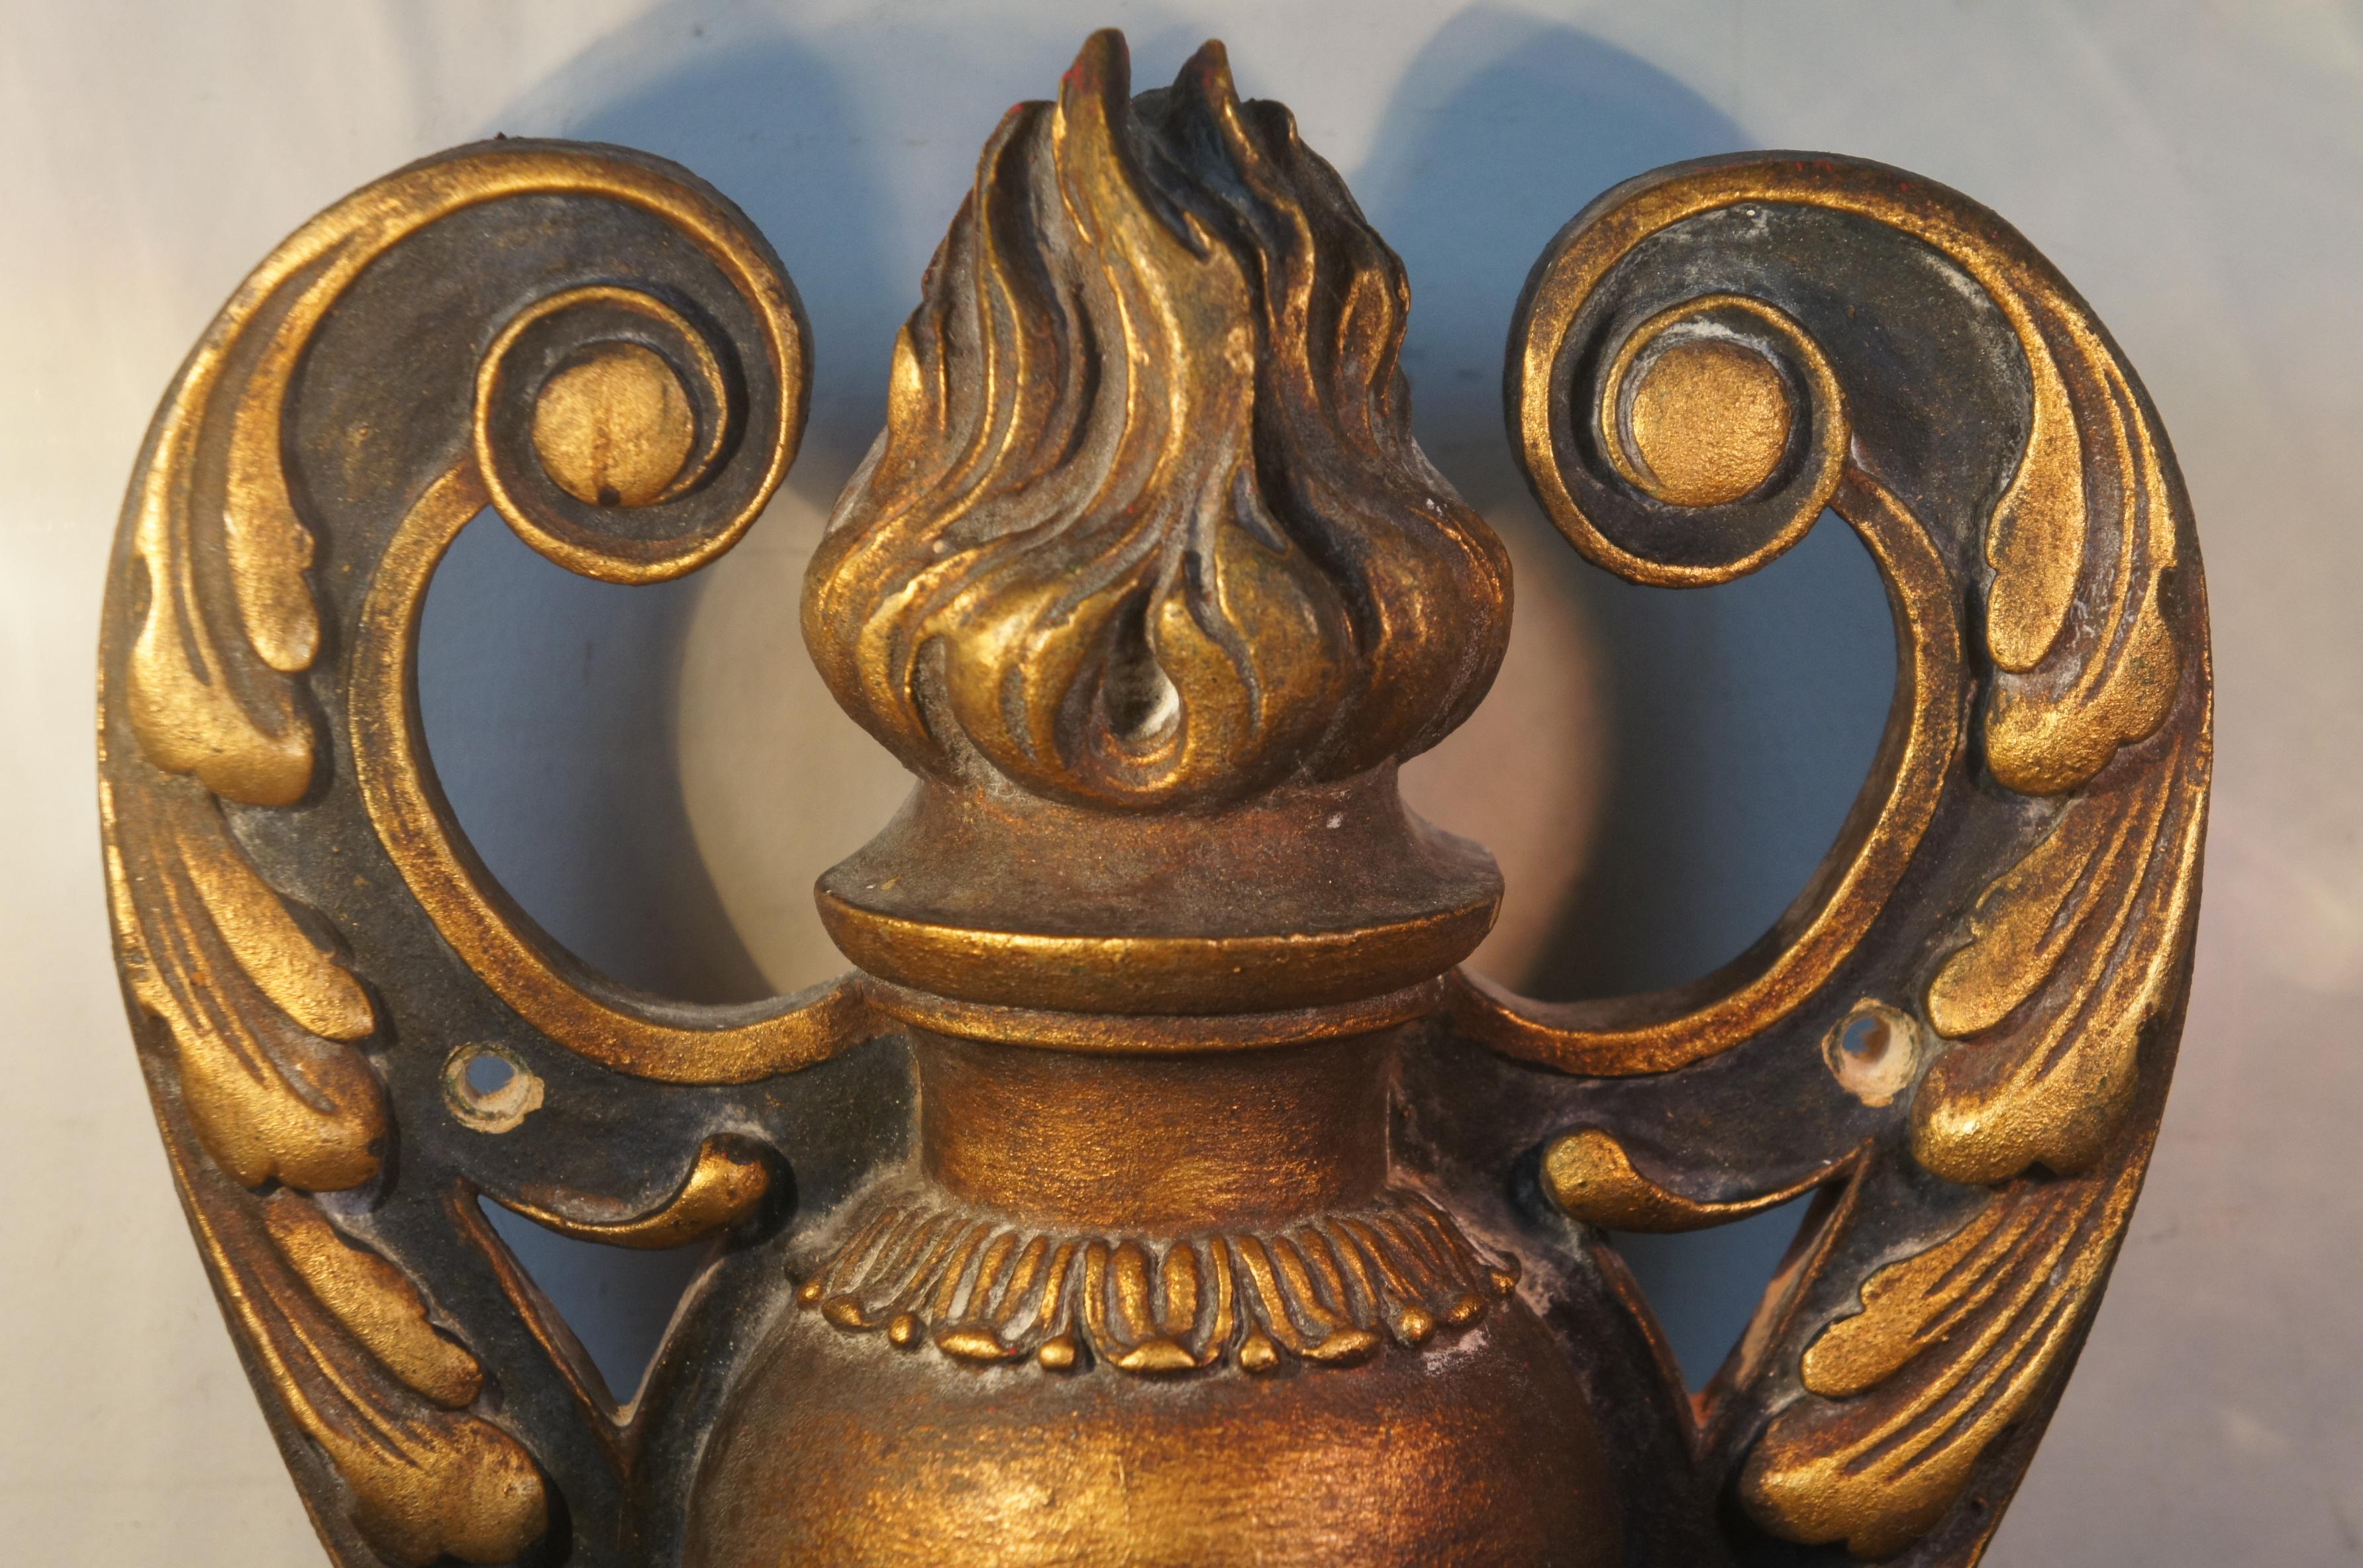 2 Antique Baroque Revival Neoclassical Carved Two Light Candelabra Wall Sconces For Sale 4